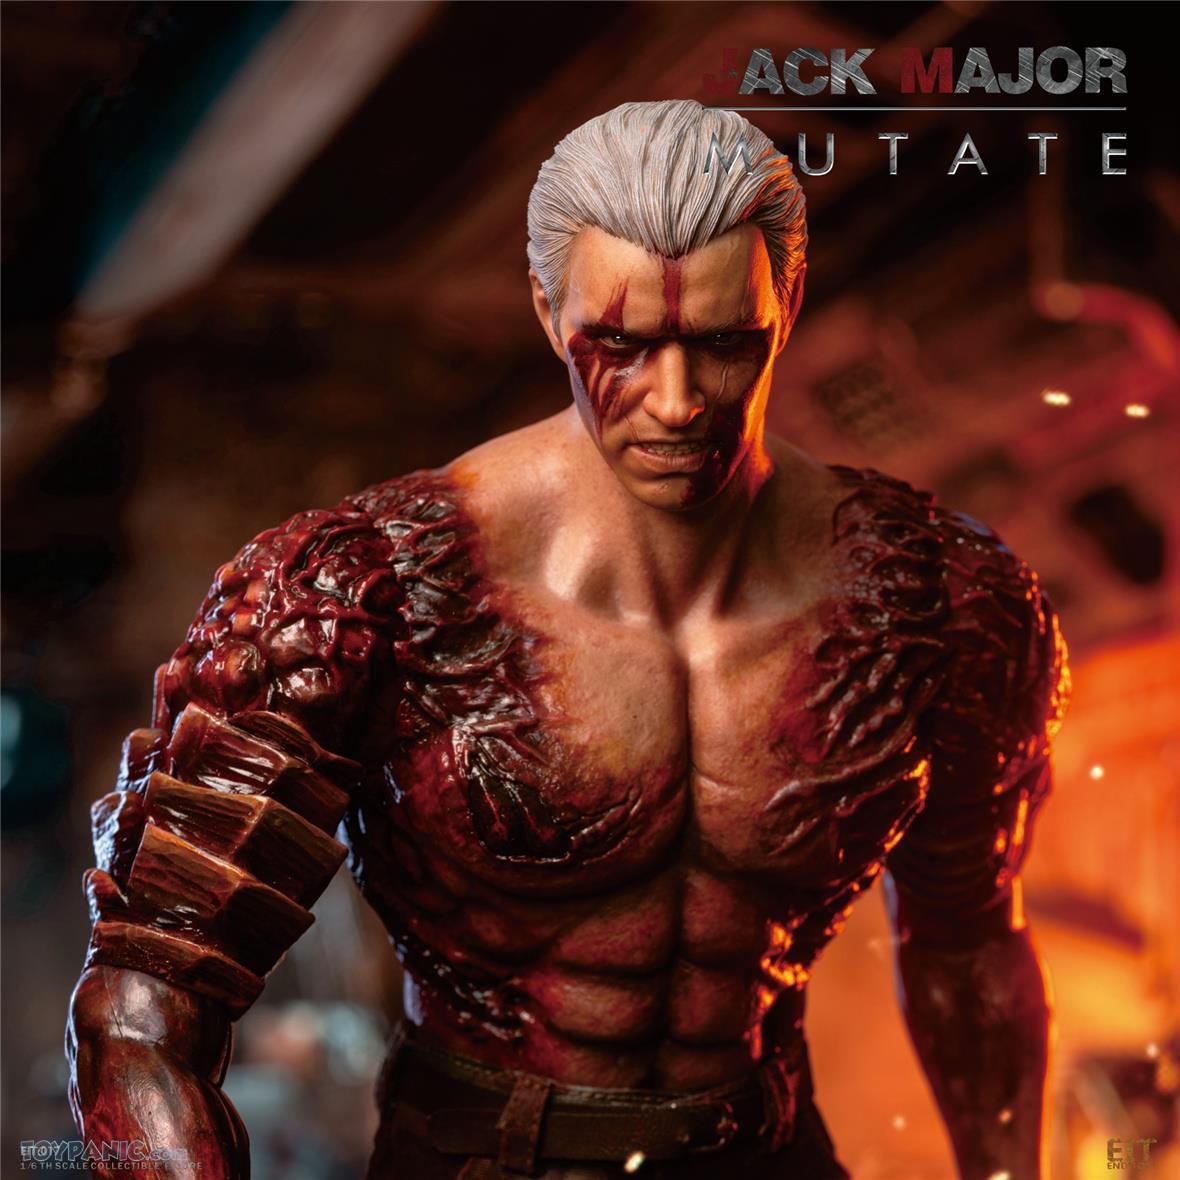 mutate - NEW PRODUCT:  1/6 Jack Major Mutate from End I Toys  2732024105954AM_1069441